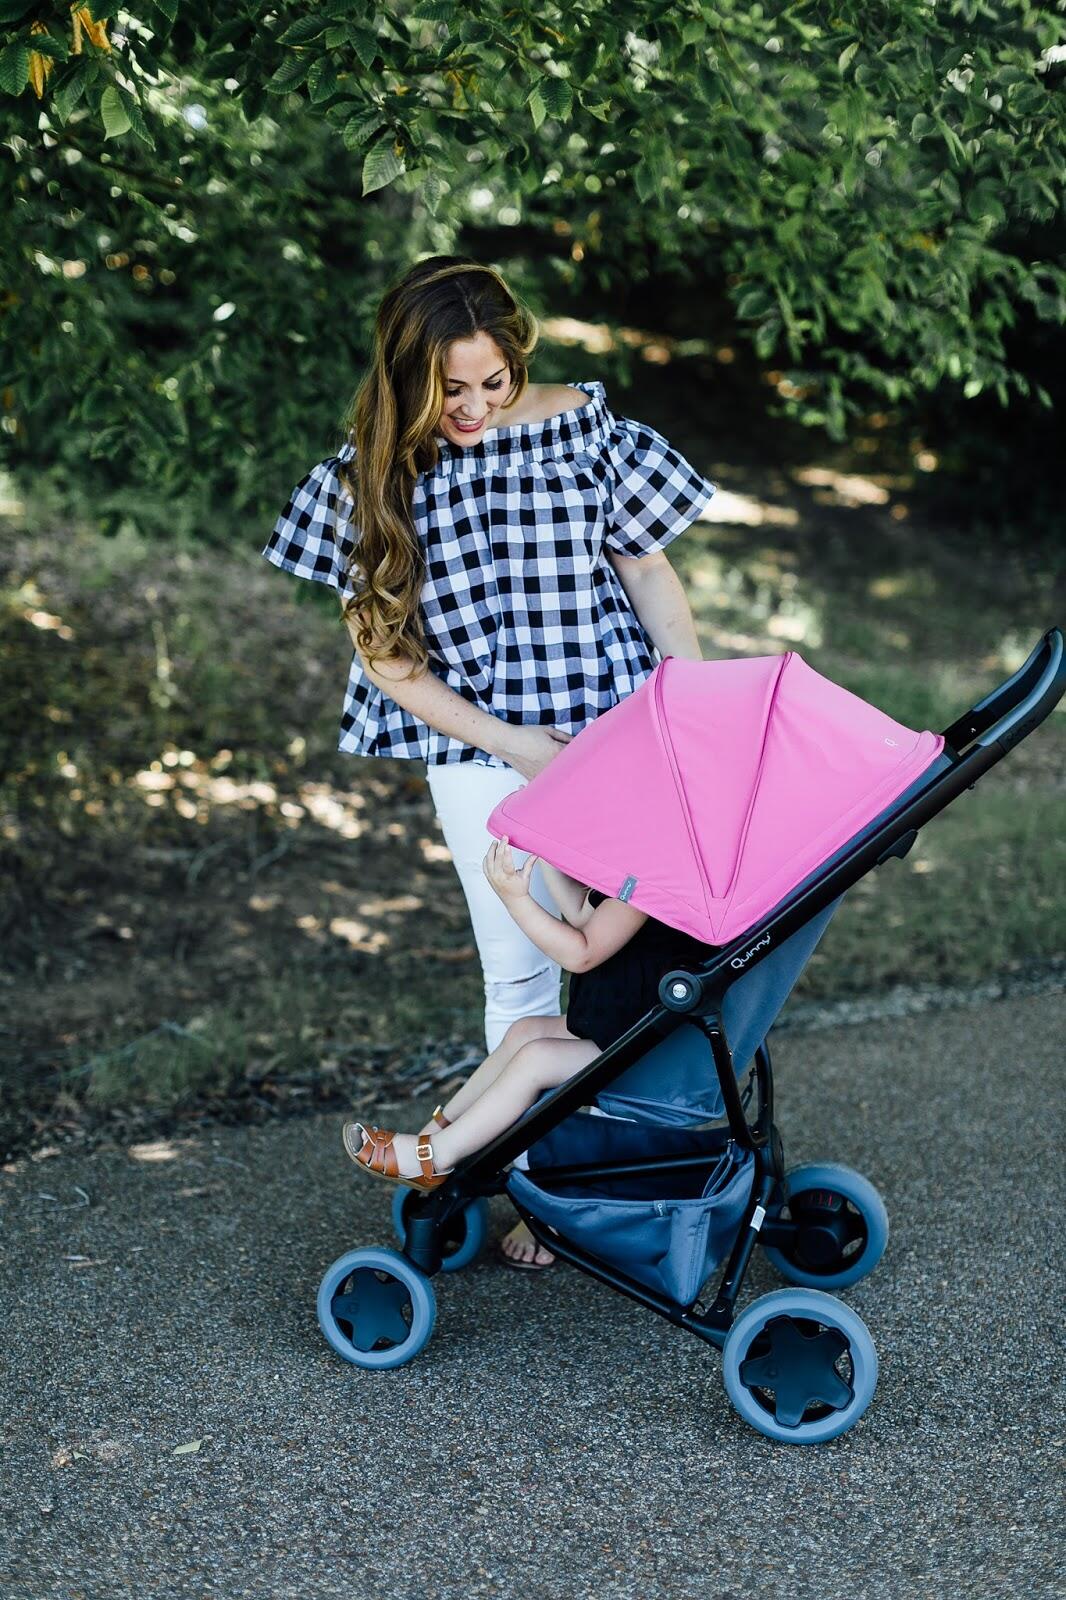 5 Activities For Toddlers on Stroller Walks by popular lifestyle blogger Laura of Walking in Memphis in High Heels